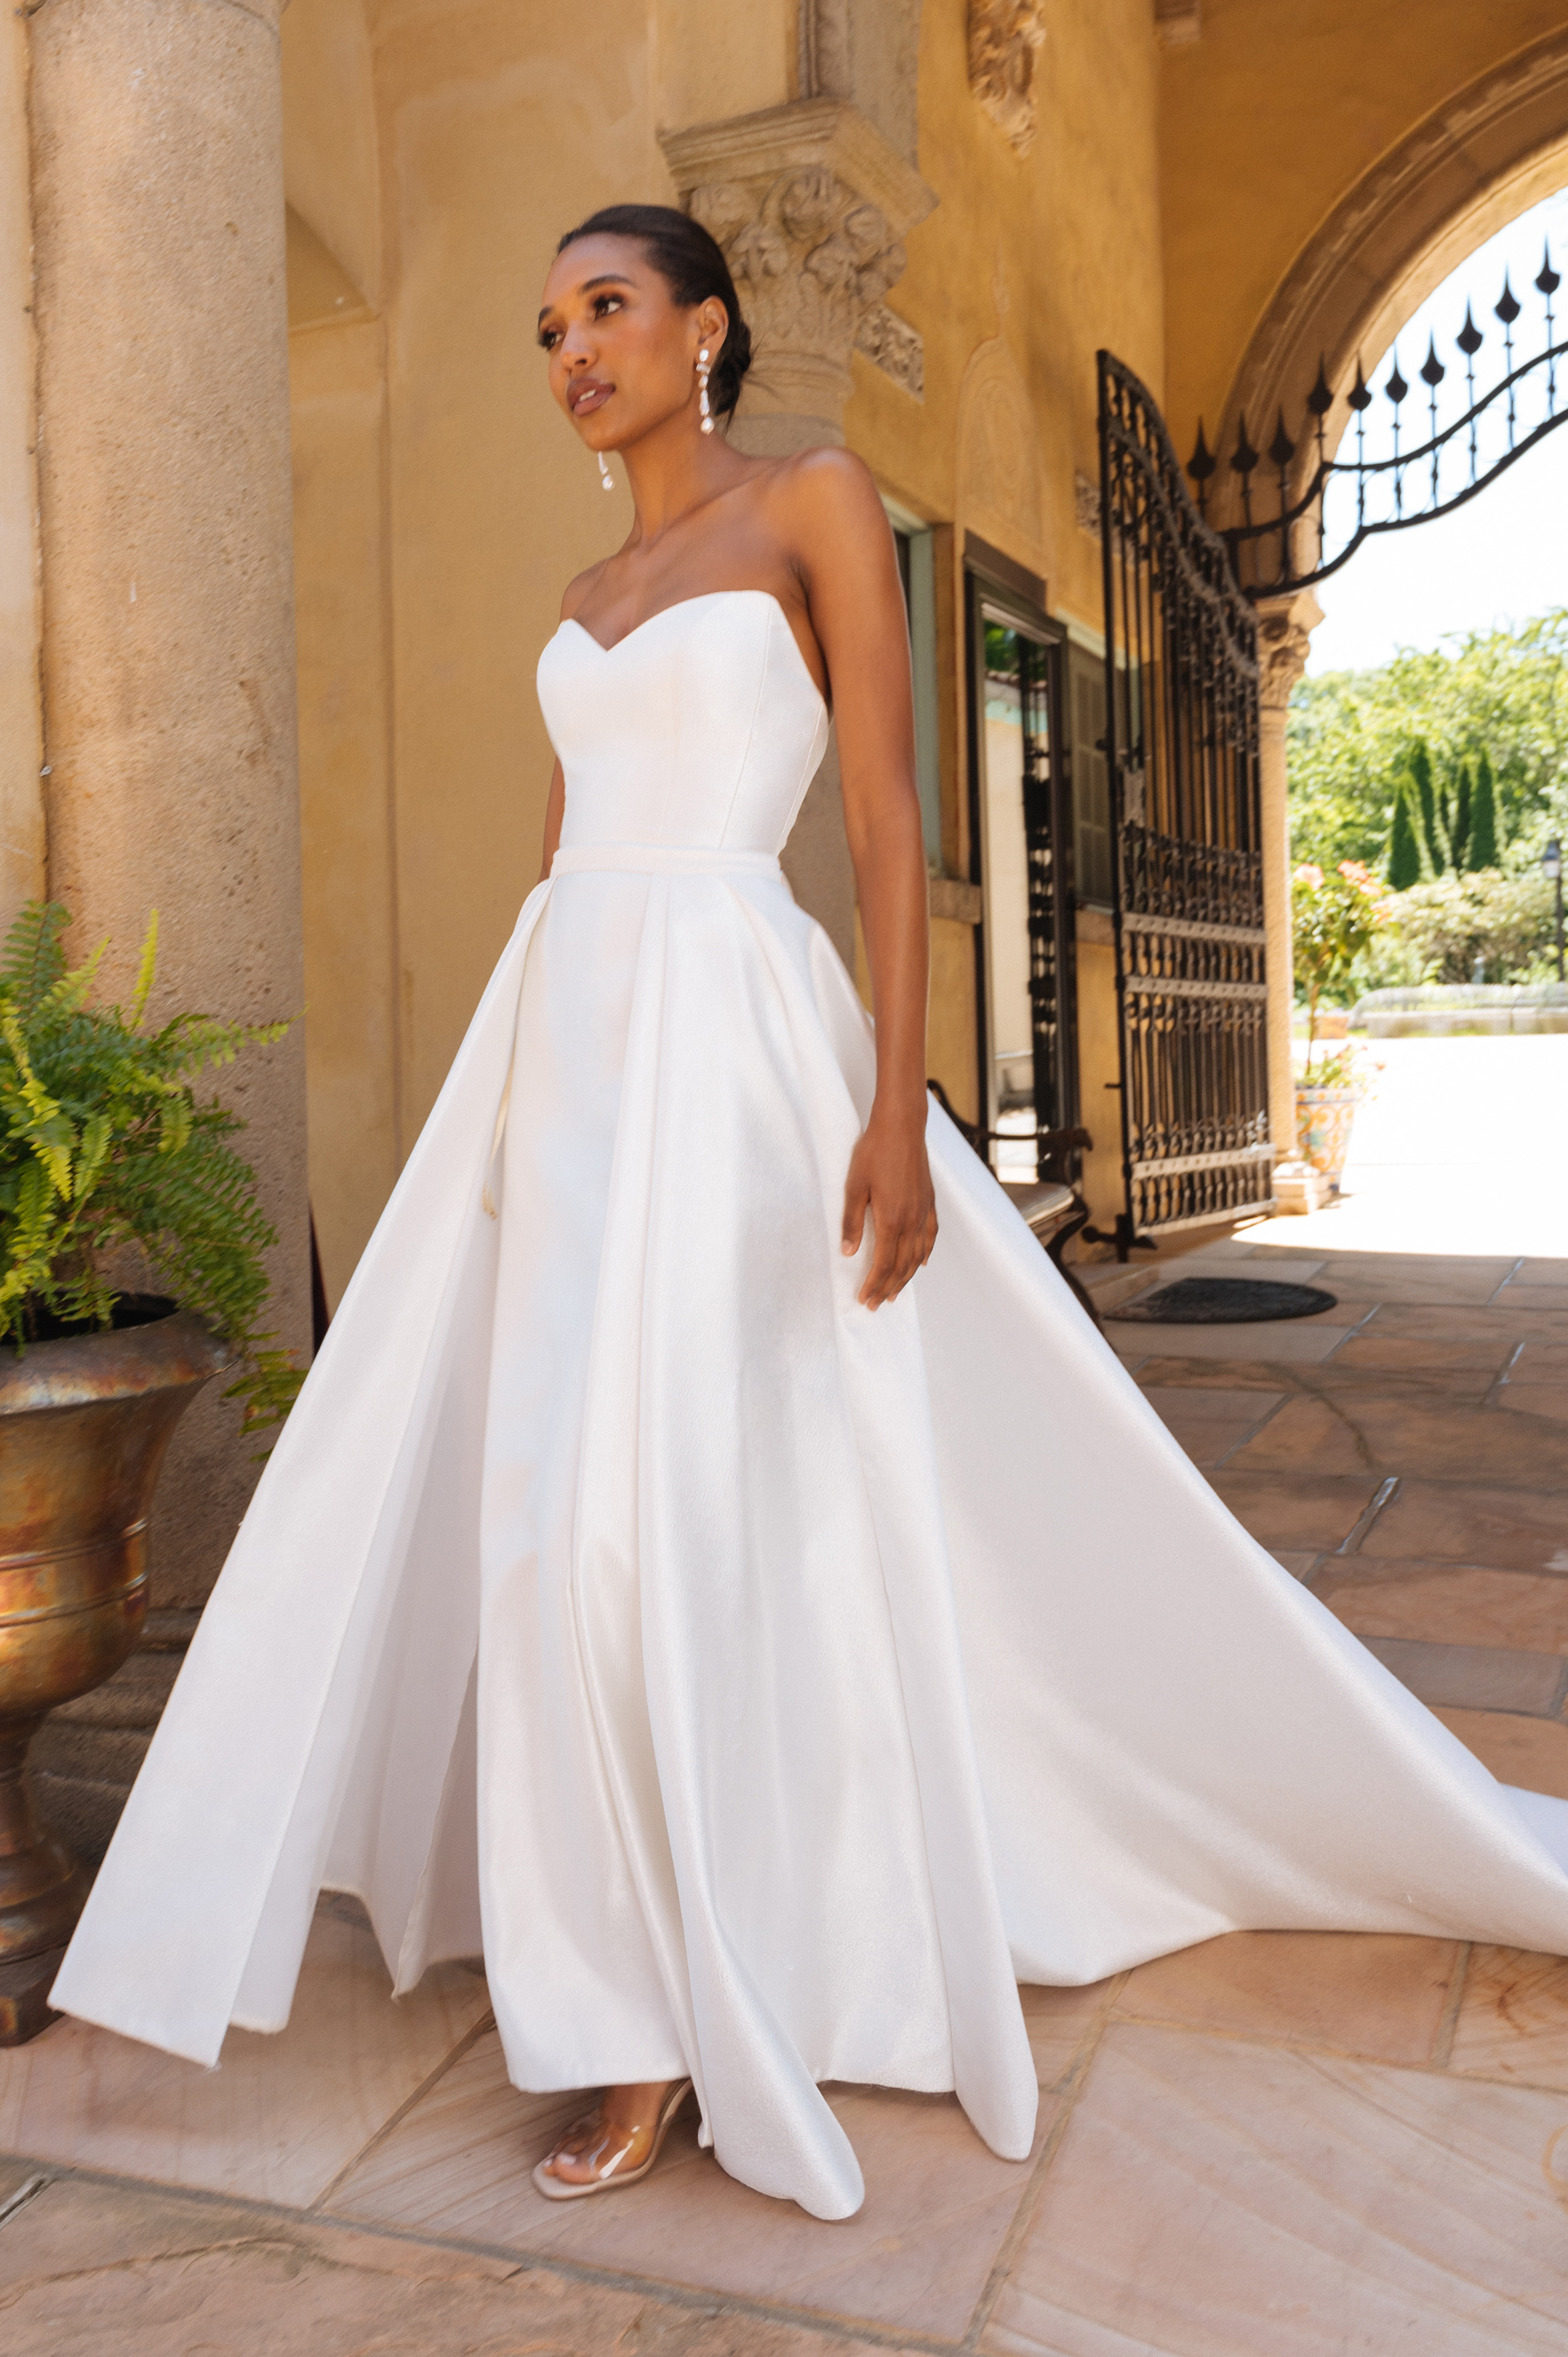 The Most Stunning Wedding Dresses Brides Wore This Year